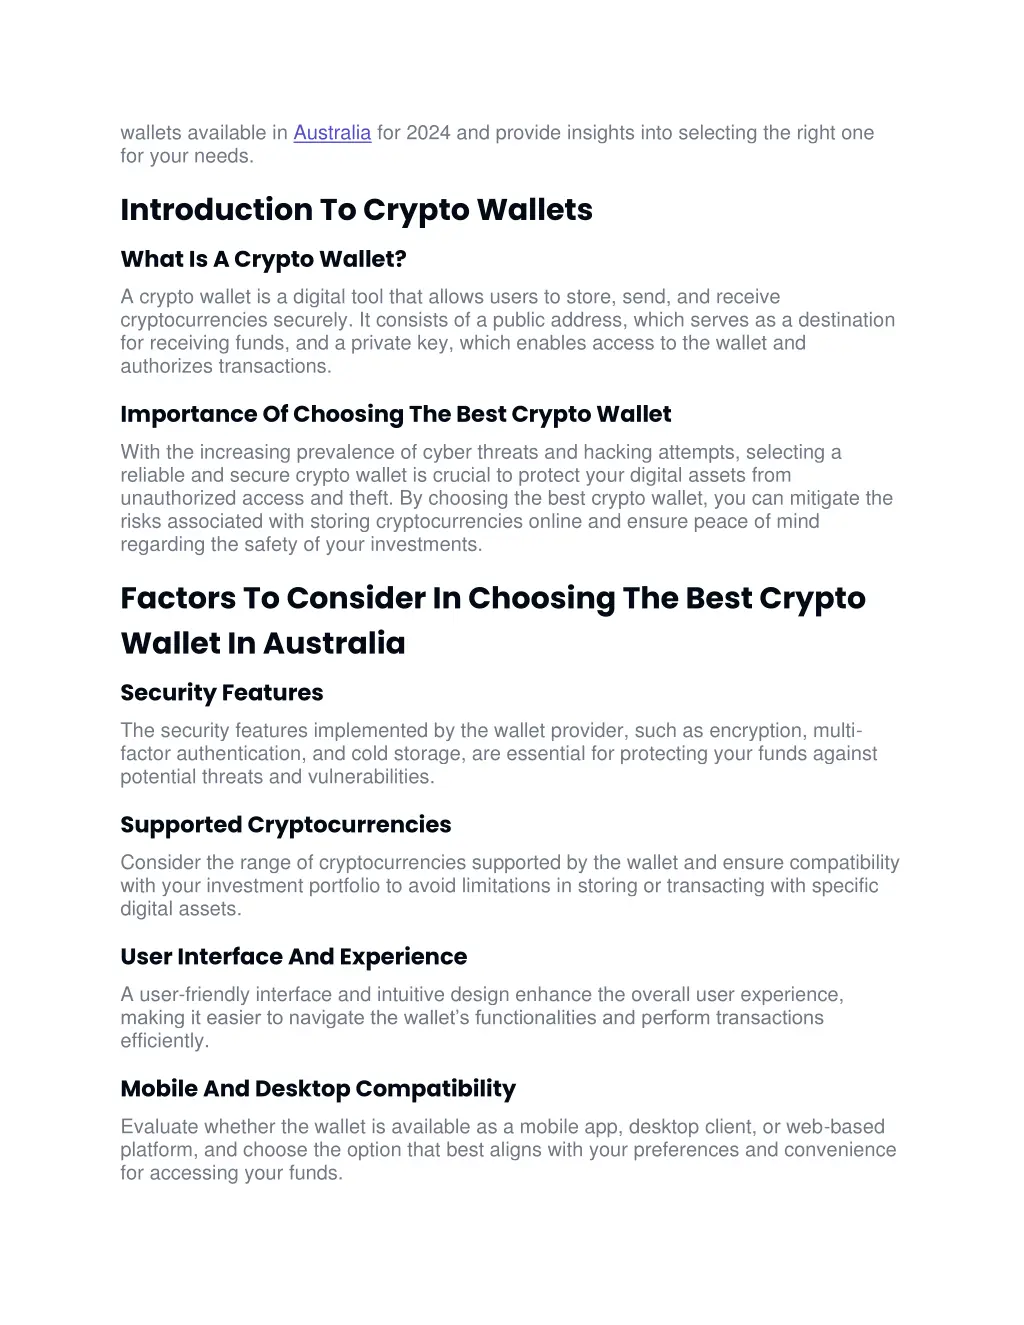 wallets available in australia for 2024